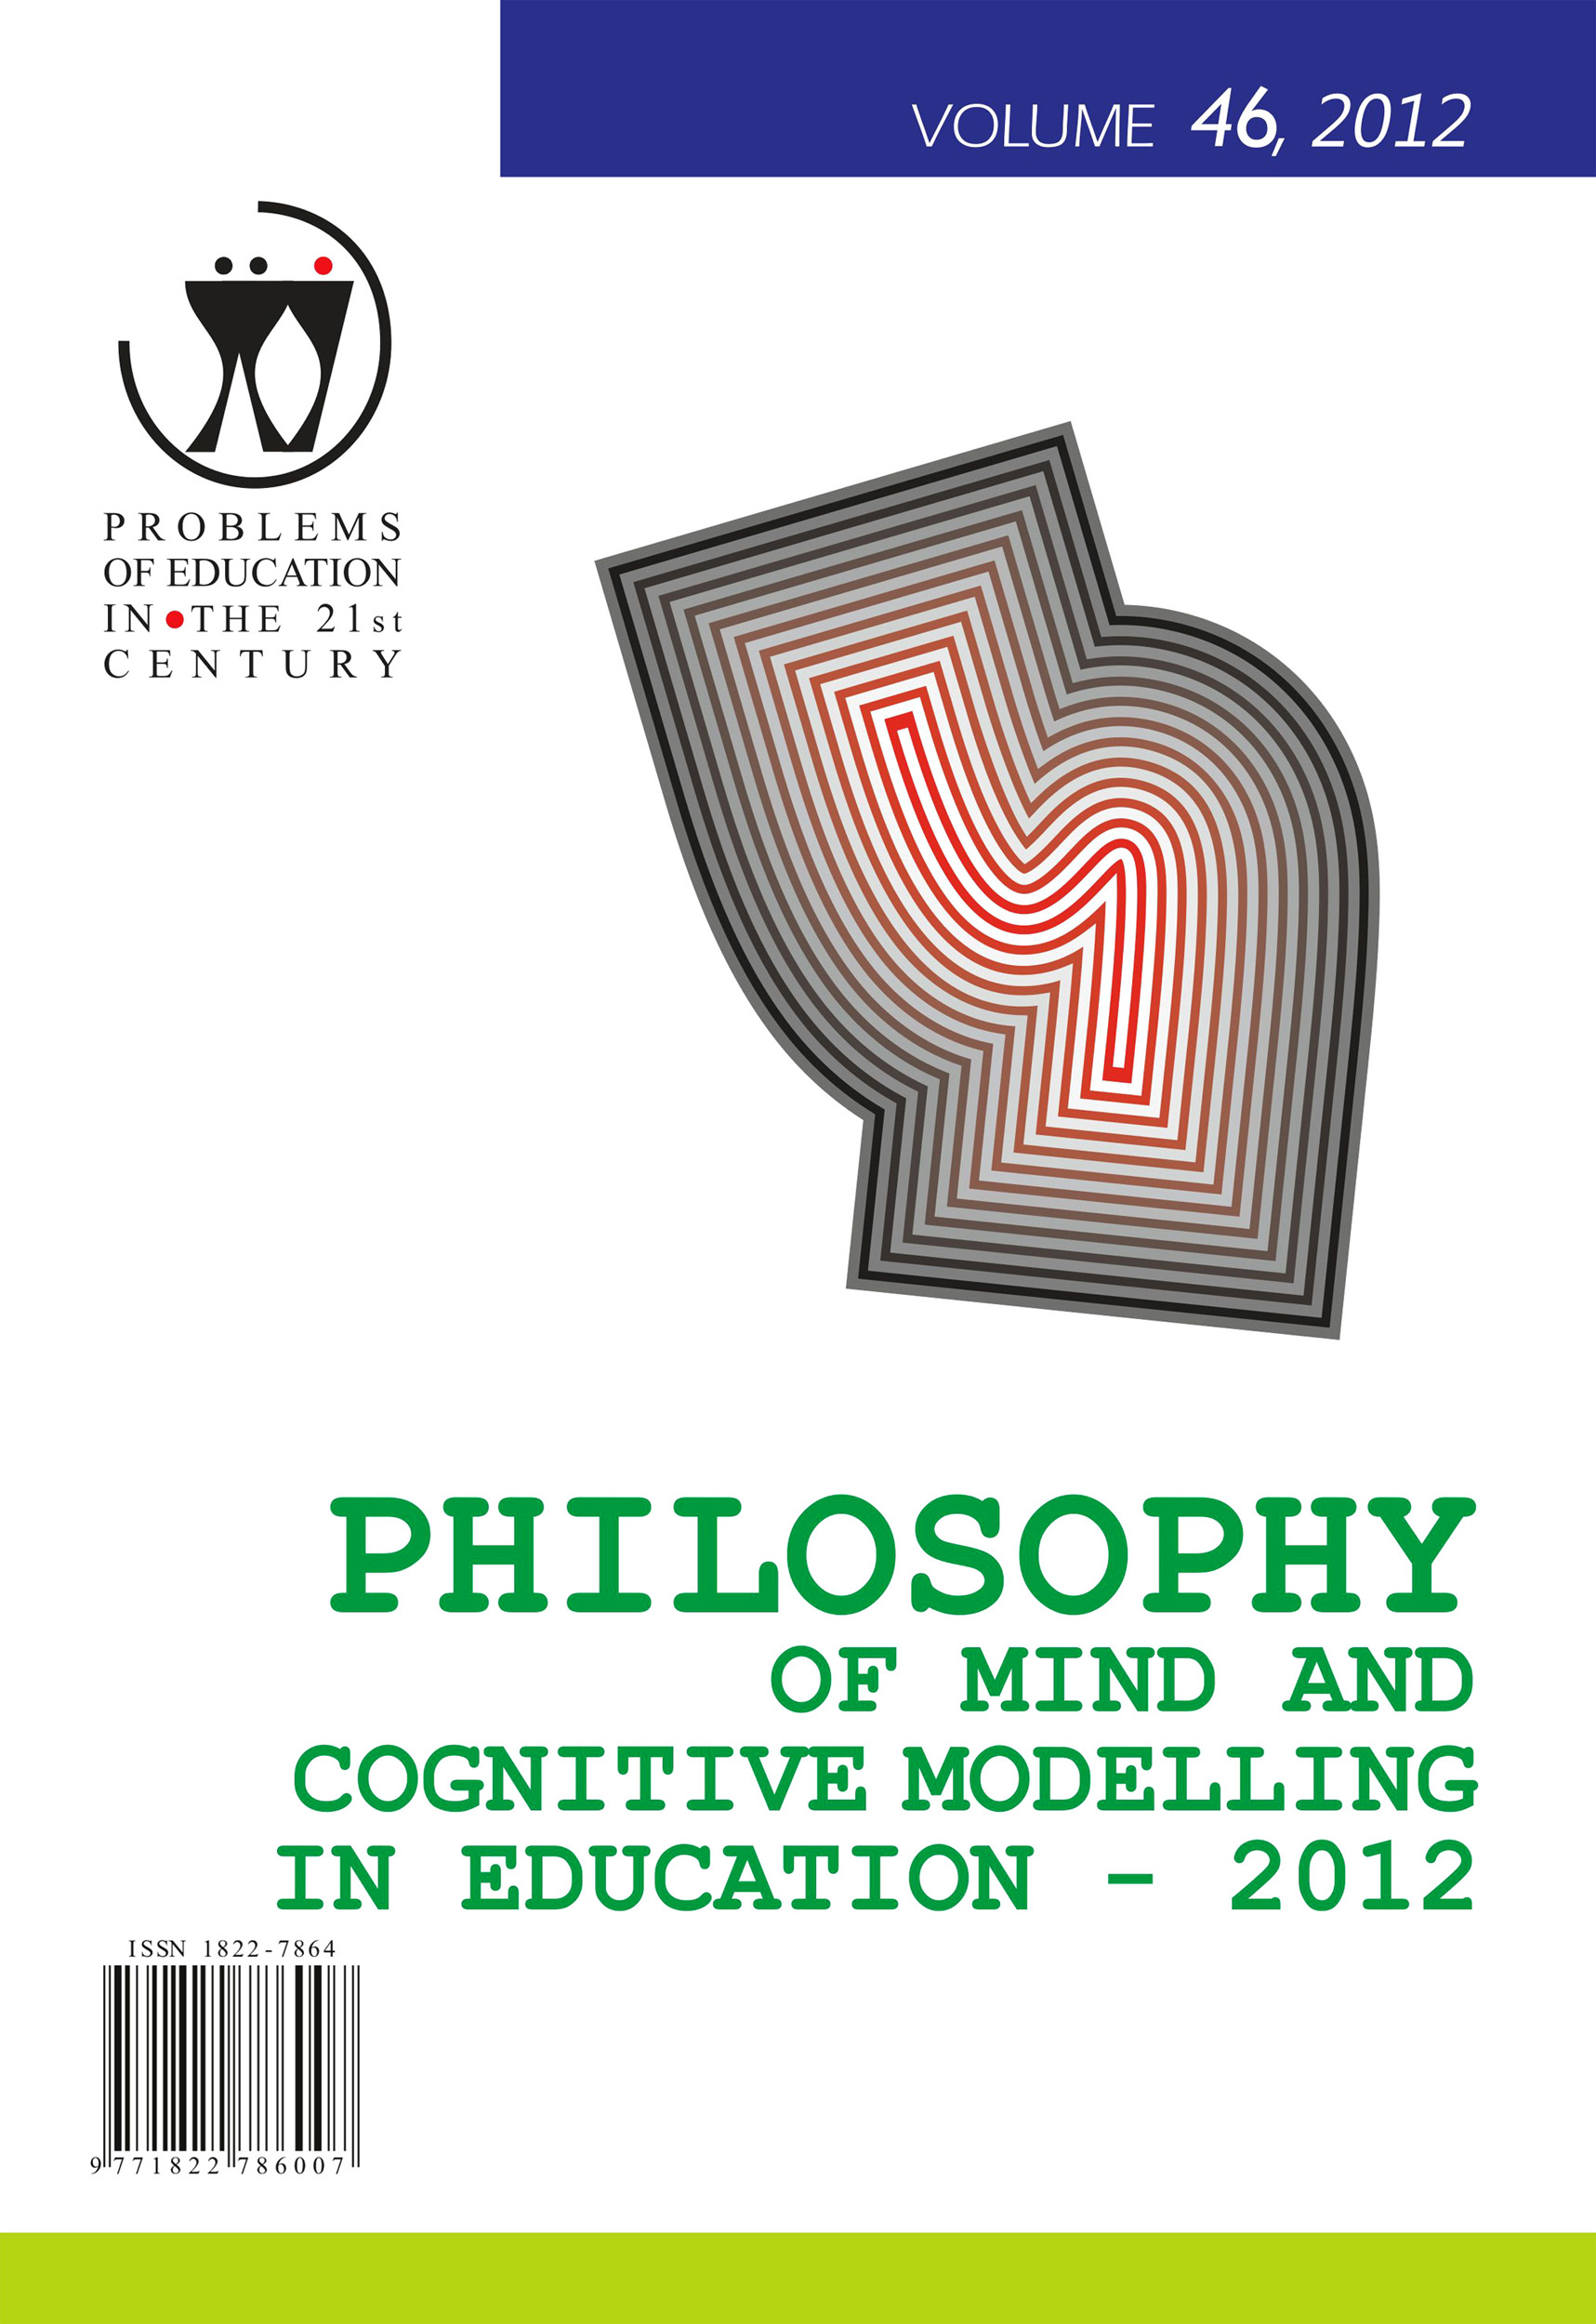 MODERN TEACHING OF COMPUTER SUBJECTS TO SUPPORT WEB 2.0 TECHNOLOGIES Cover Image